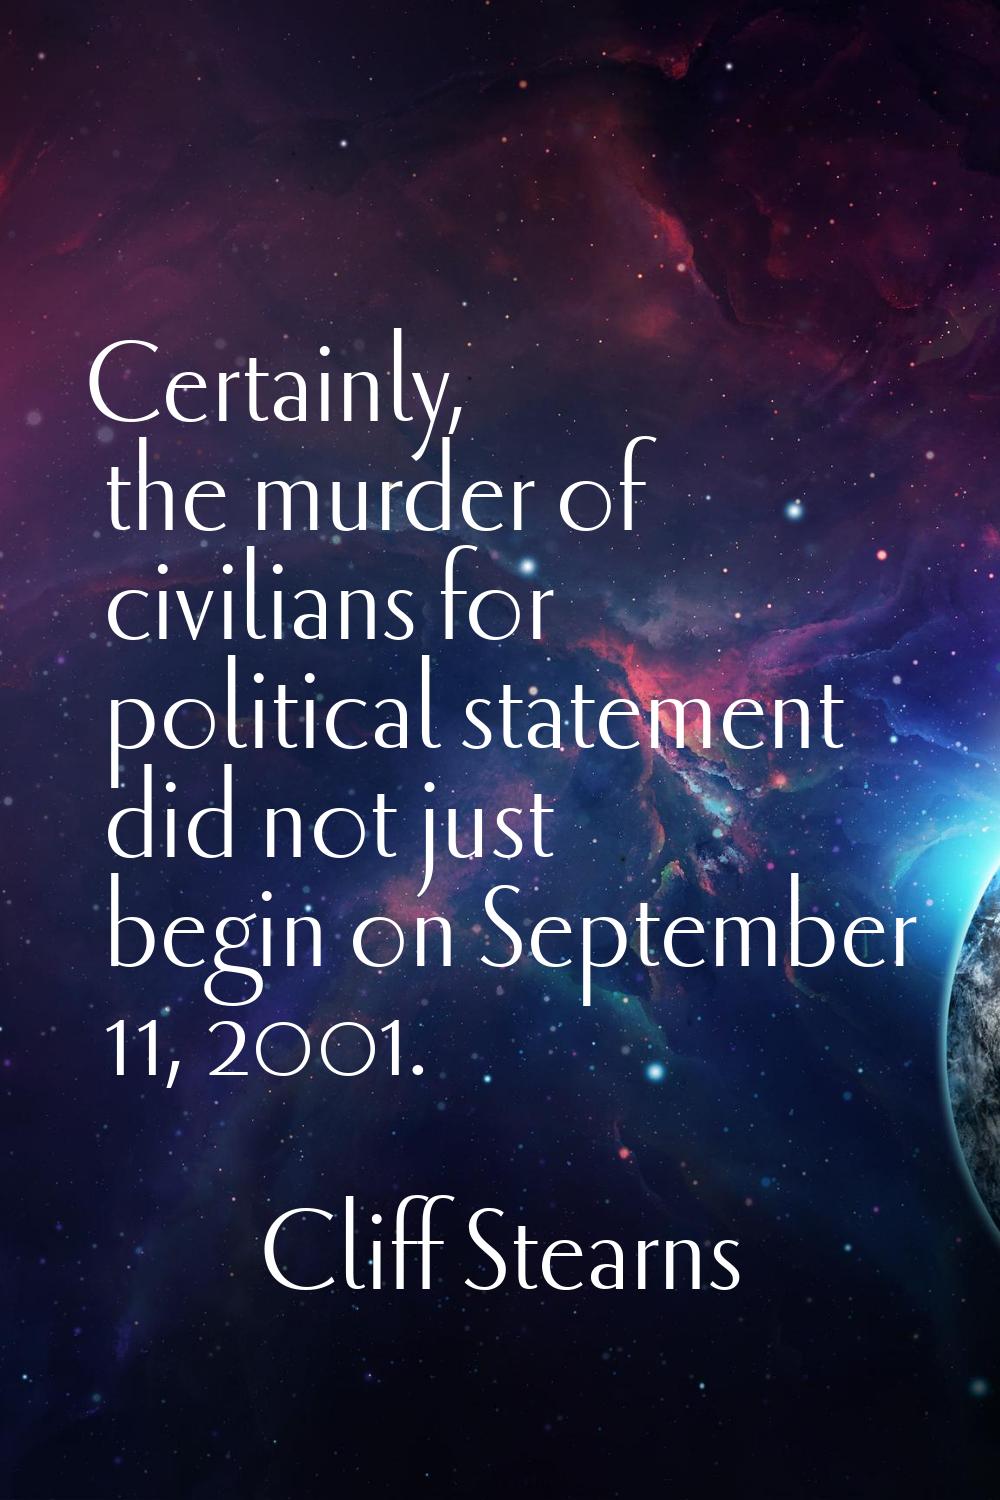 Certainly, the murder of civilians for political statement did not just begin on September 11, 2001